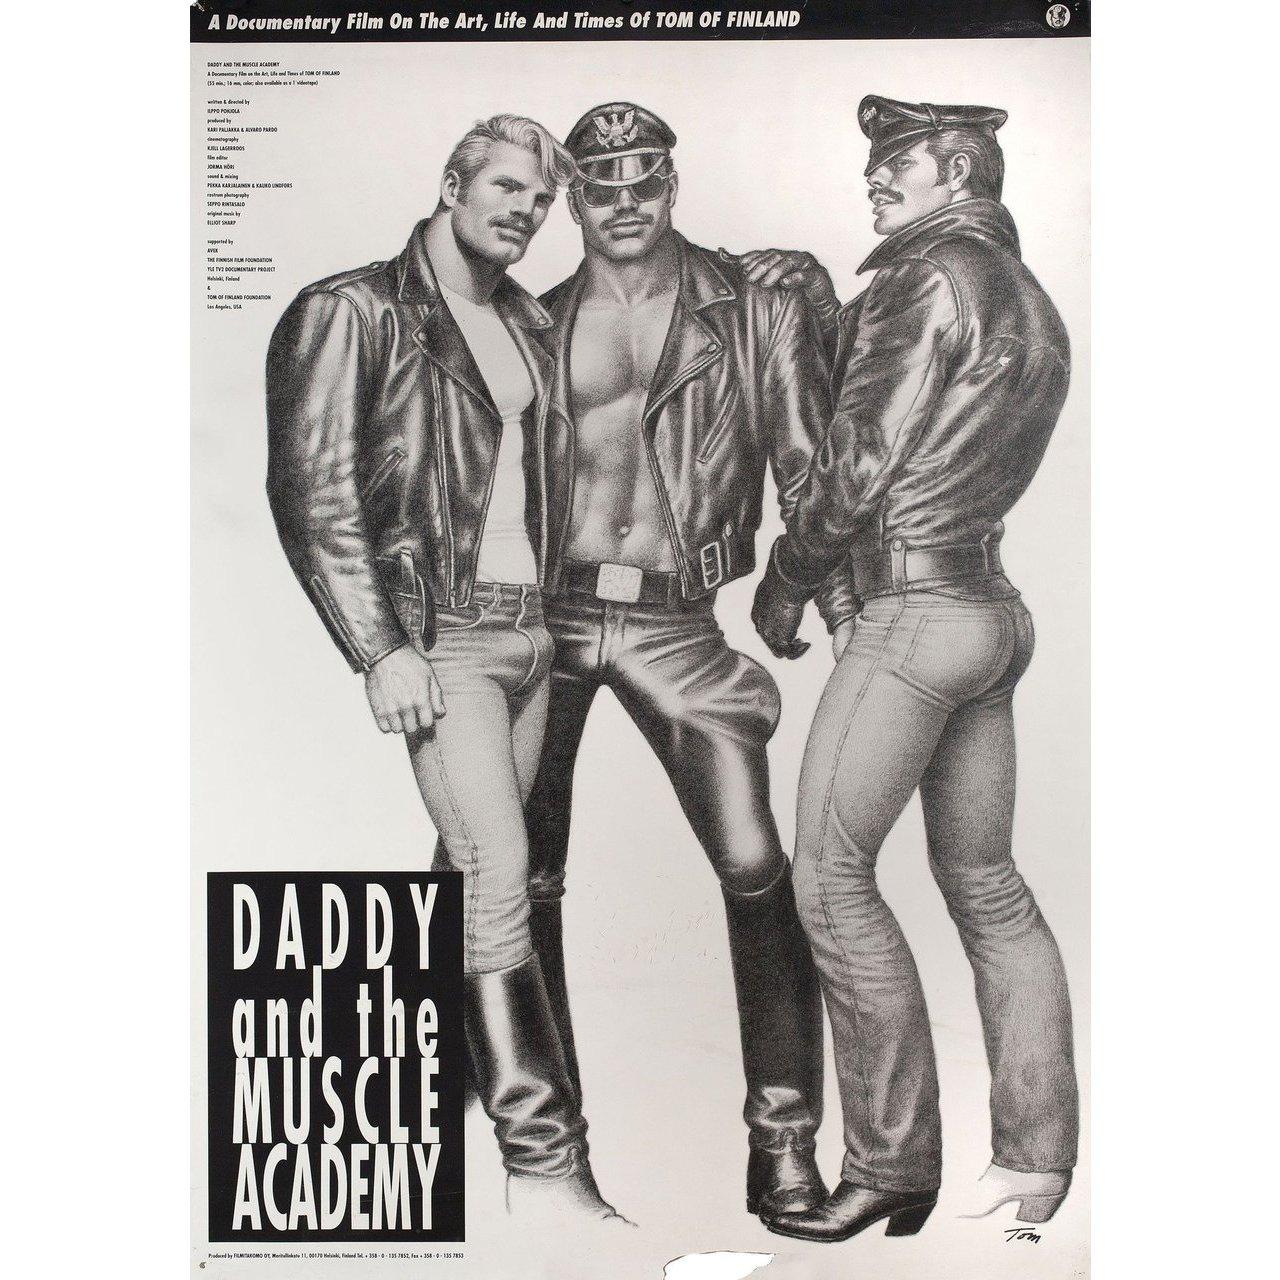 American Daddy and the Muscle Academy 1992 U.S. One Sheet Film Poster